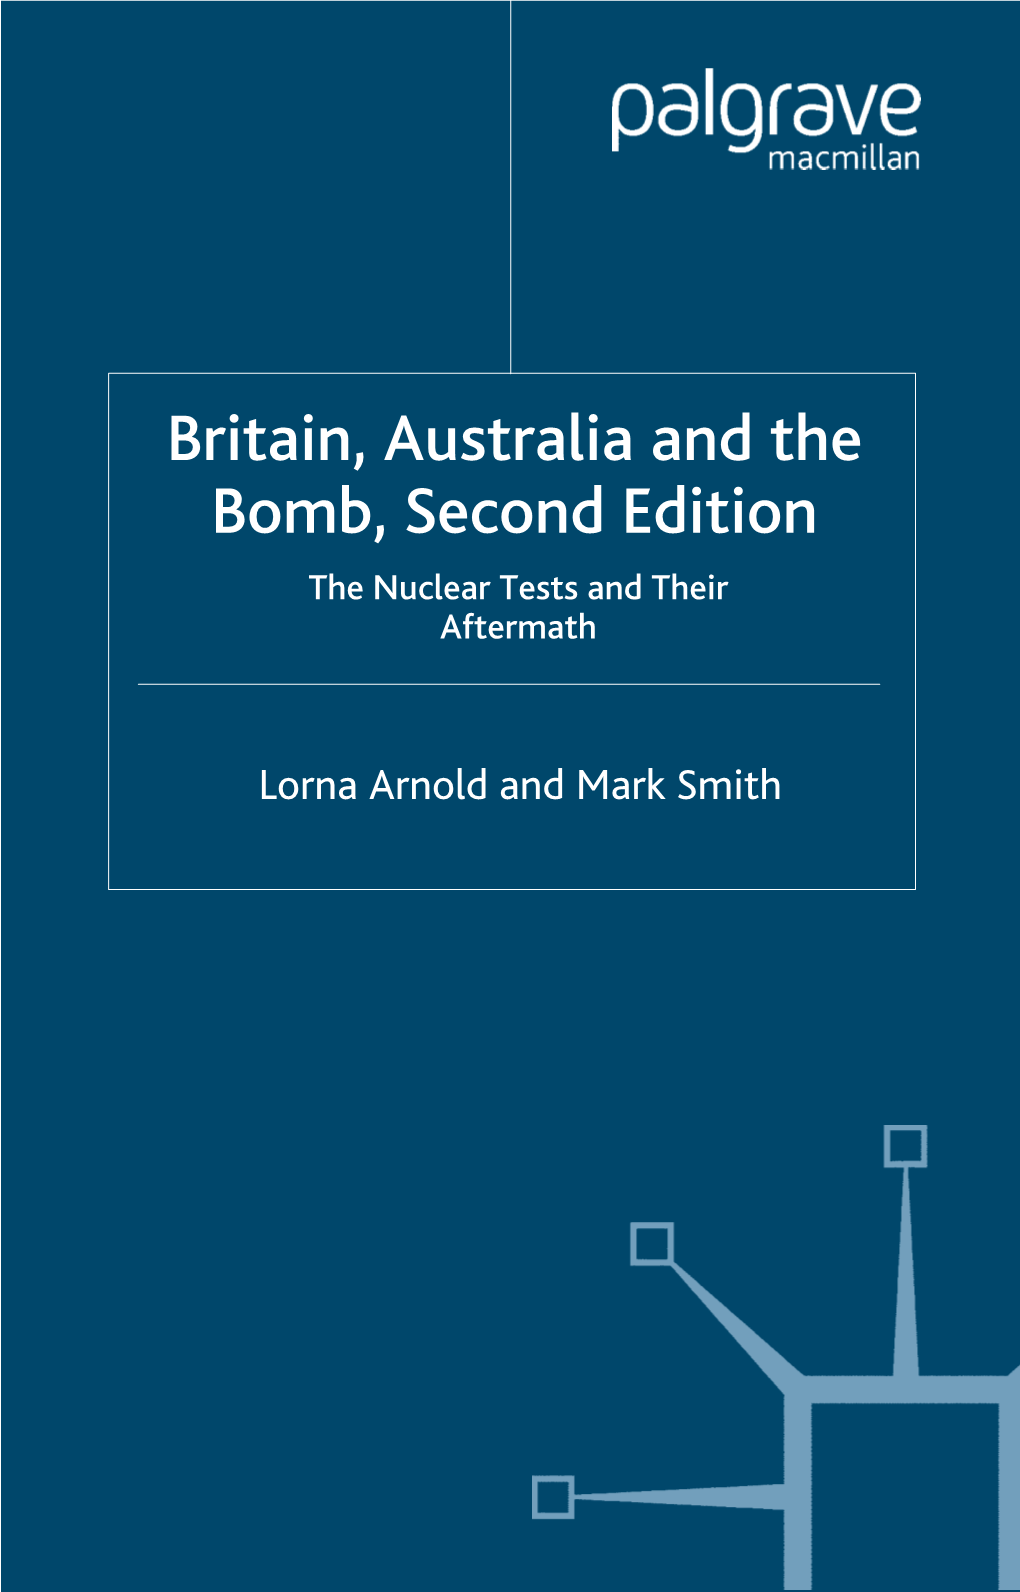 Britain, Australia and the Bomb, Second Edition the Nuclear Tests and Their Aftermath